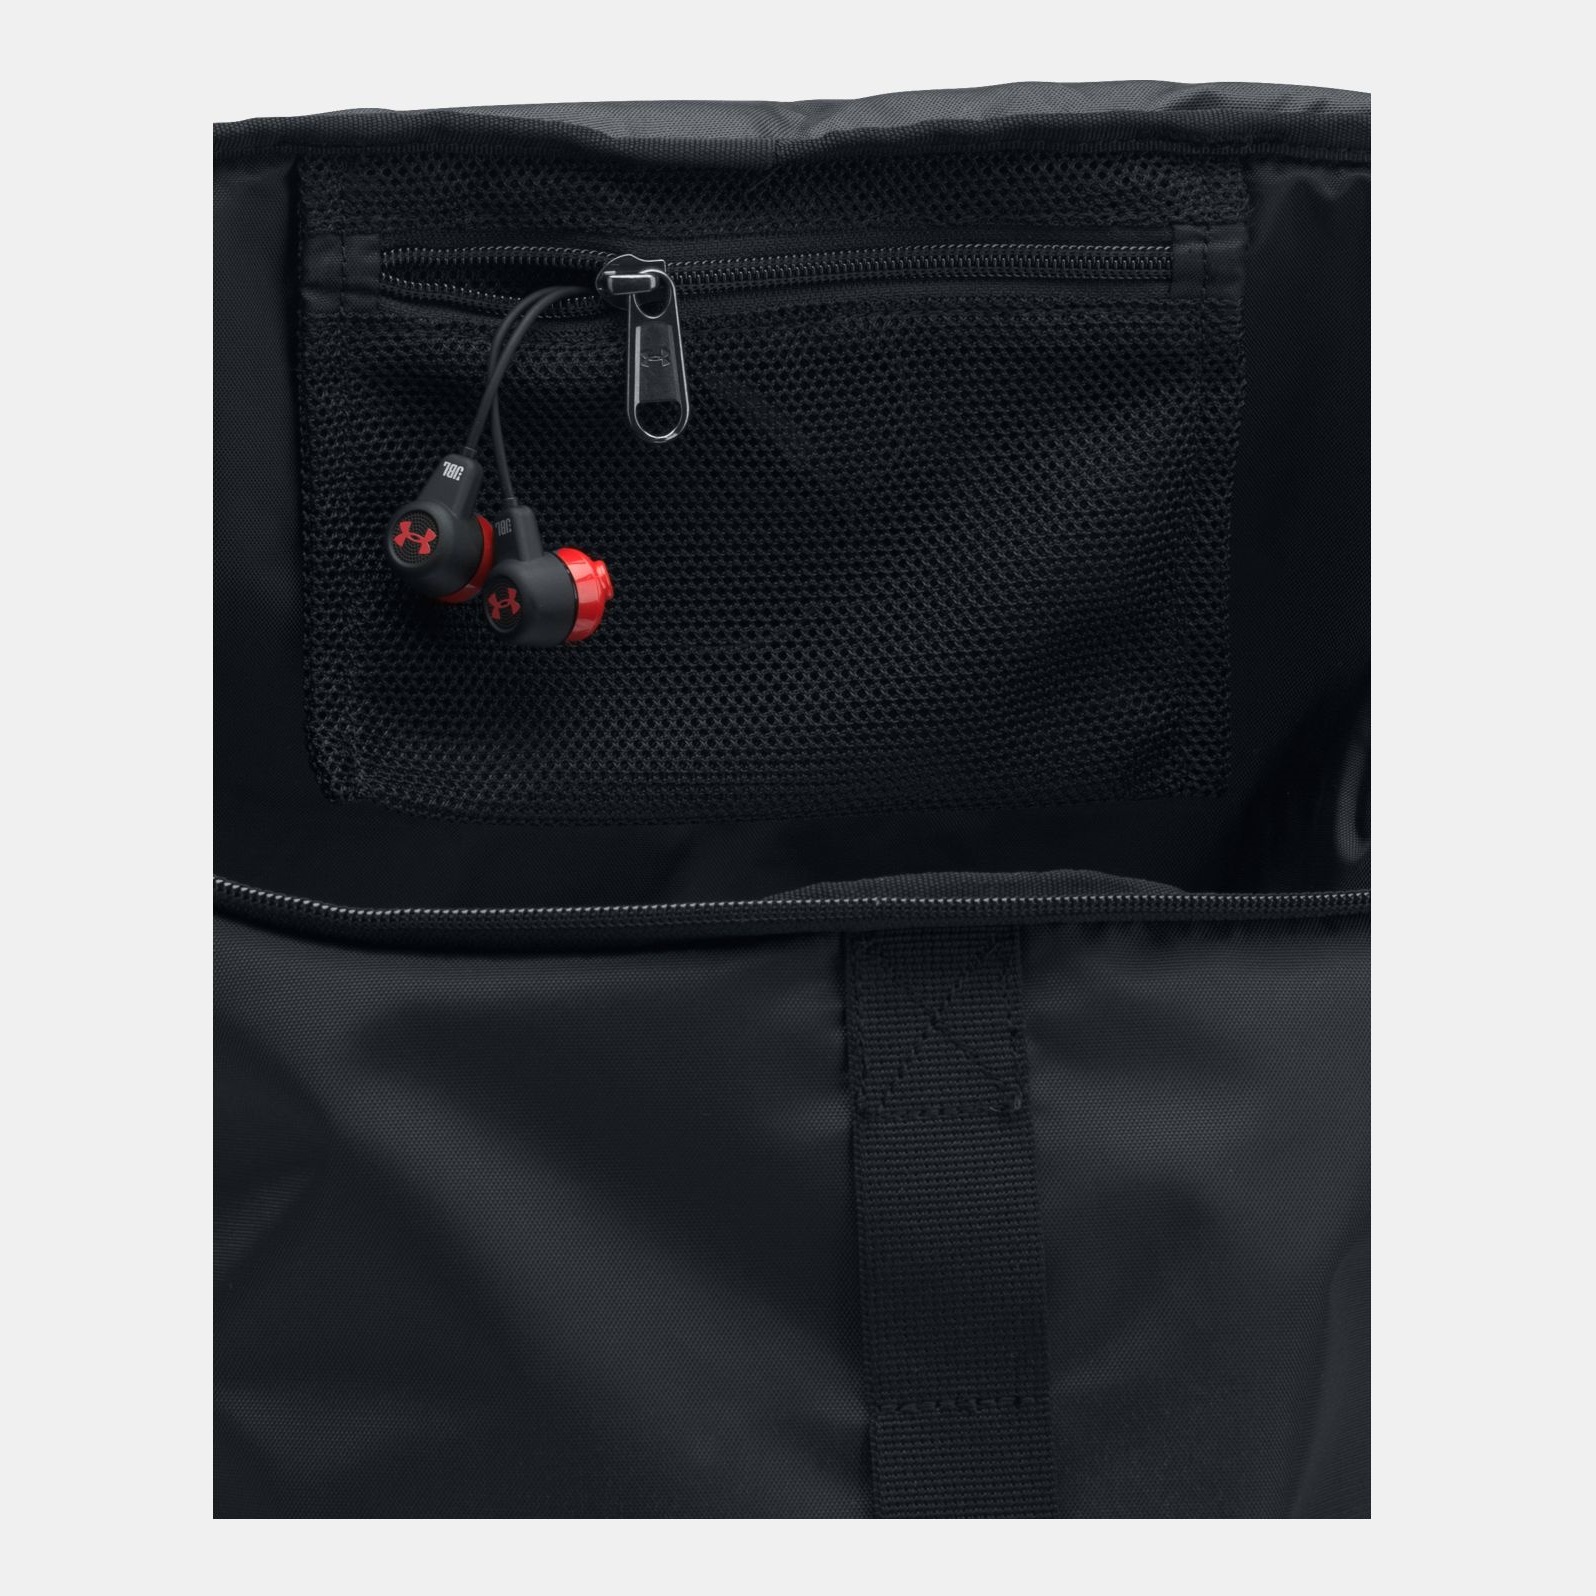 Bagpacks -  under armour Expandable Sackpack 0203